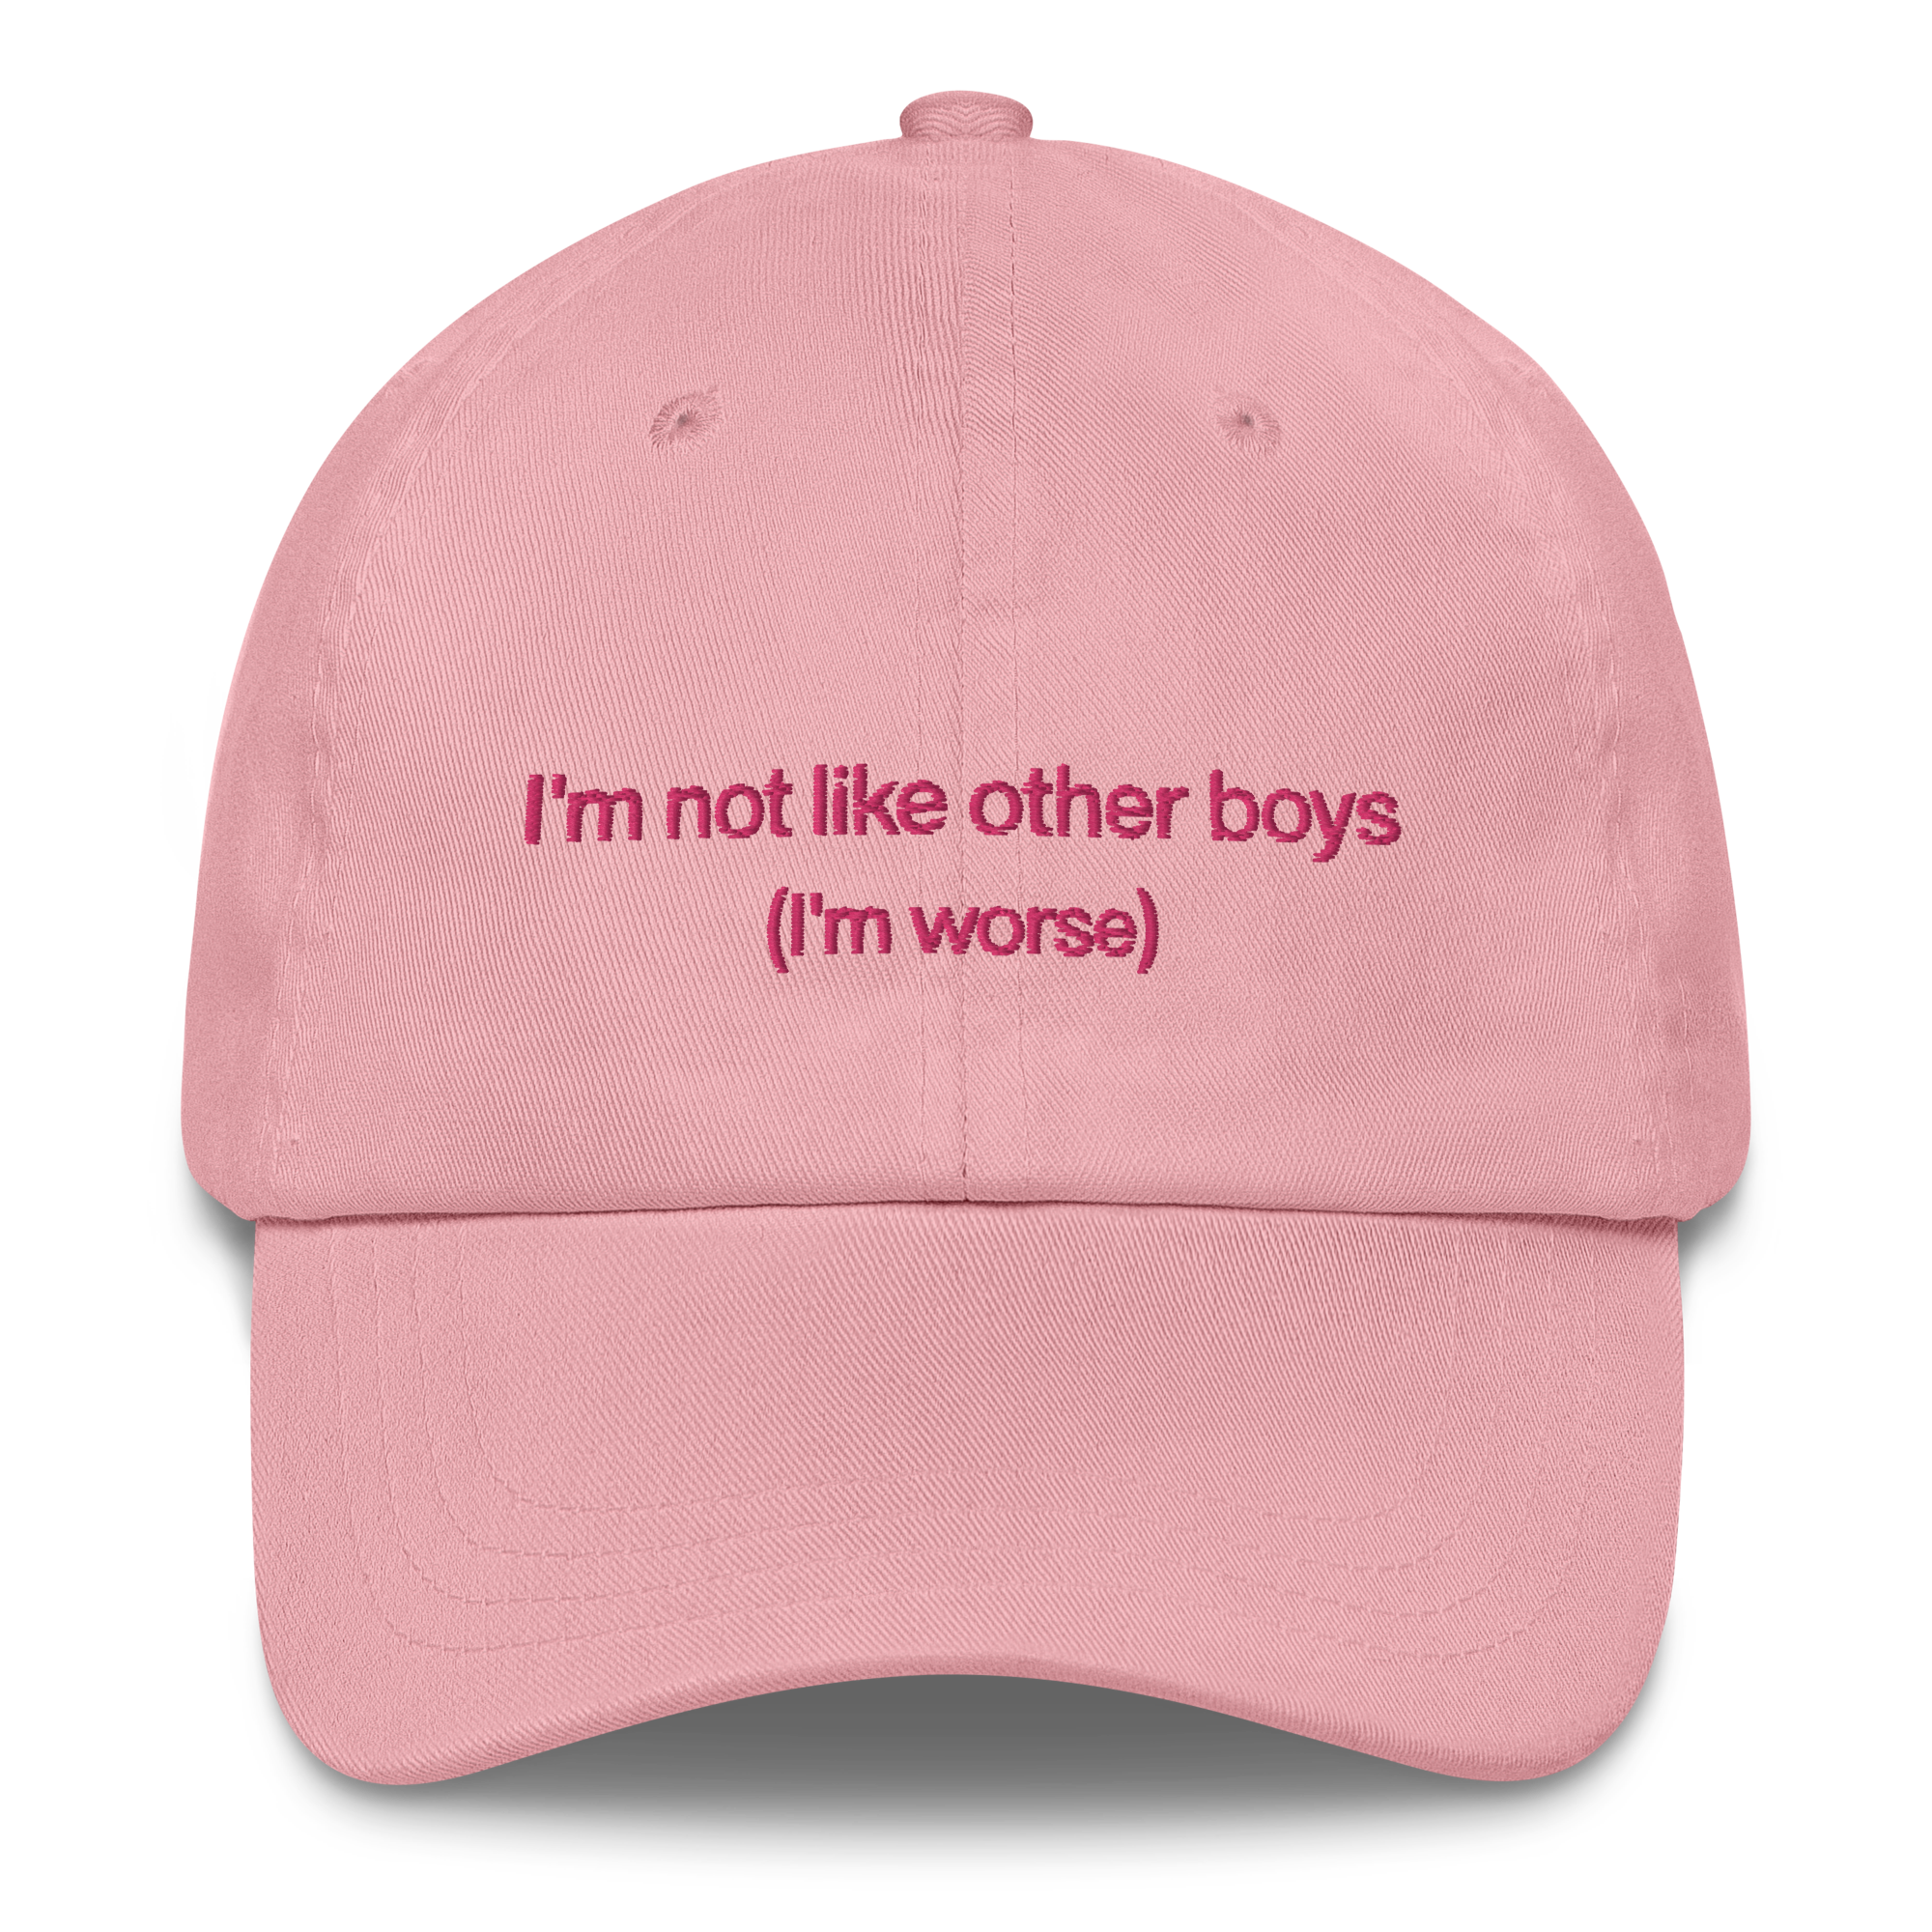 classic-dad-hat-pink-front-667b1f4be0fc3.png